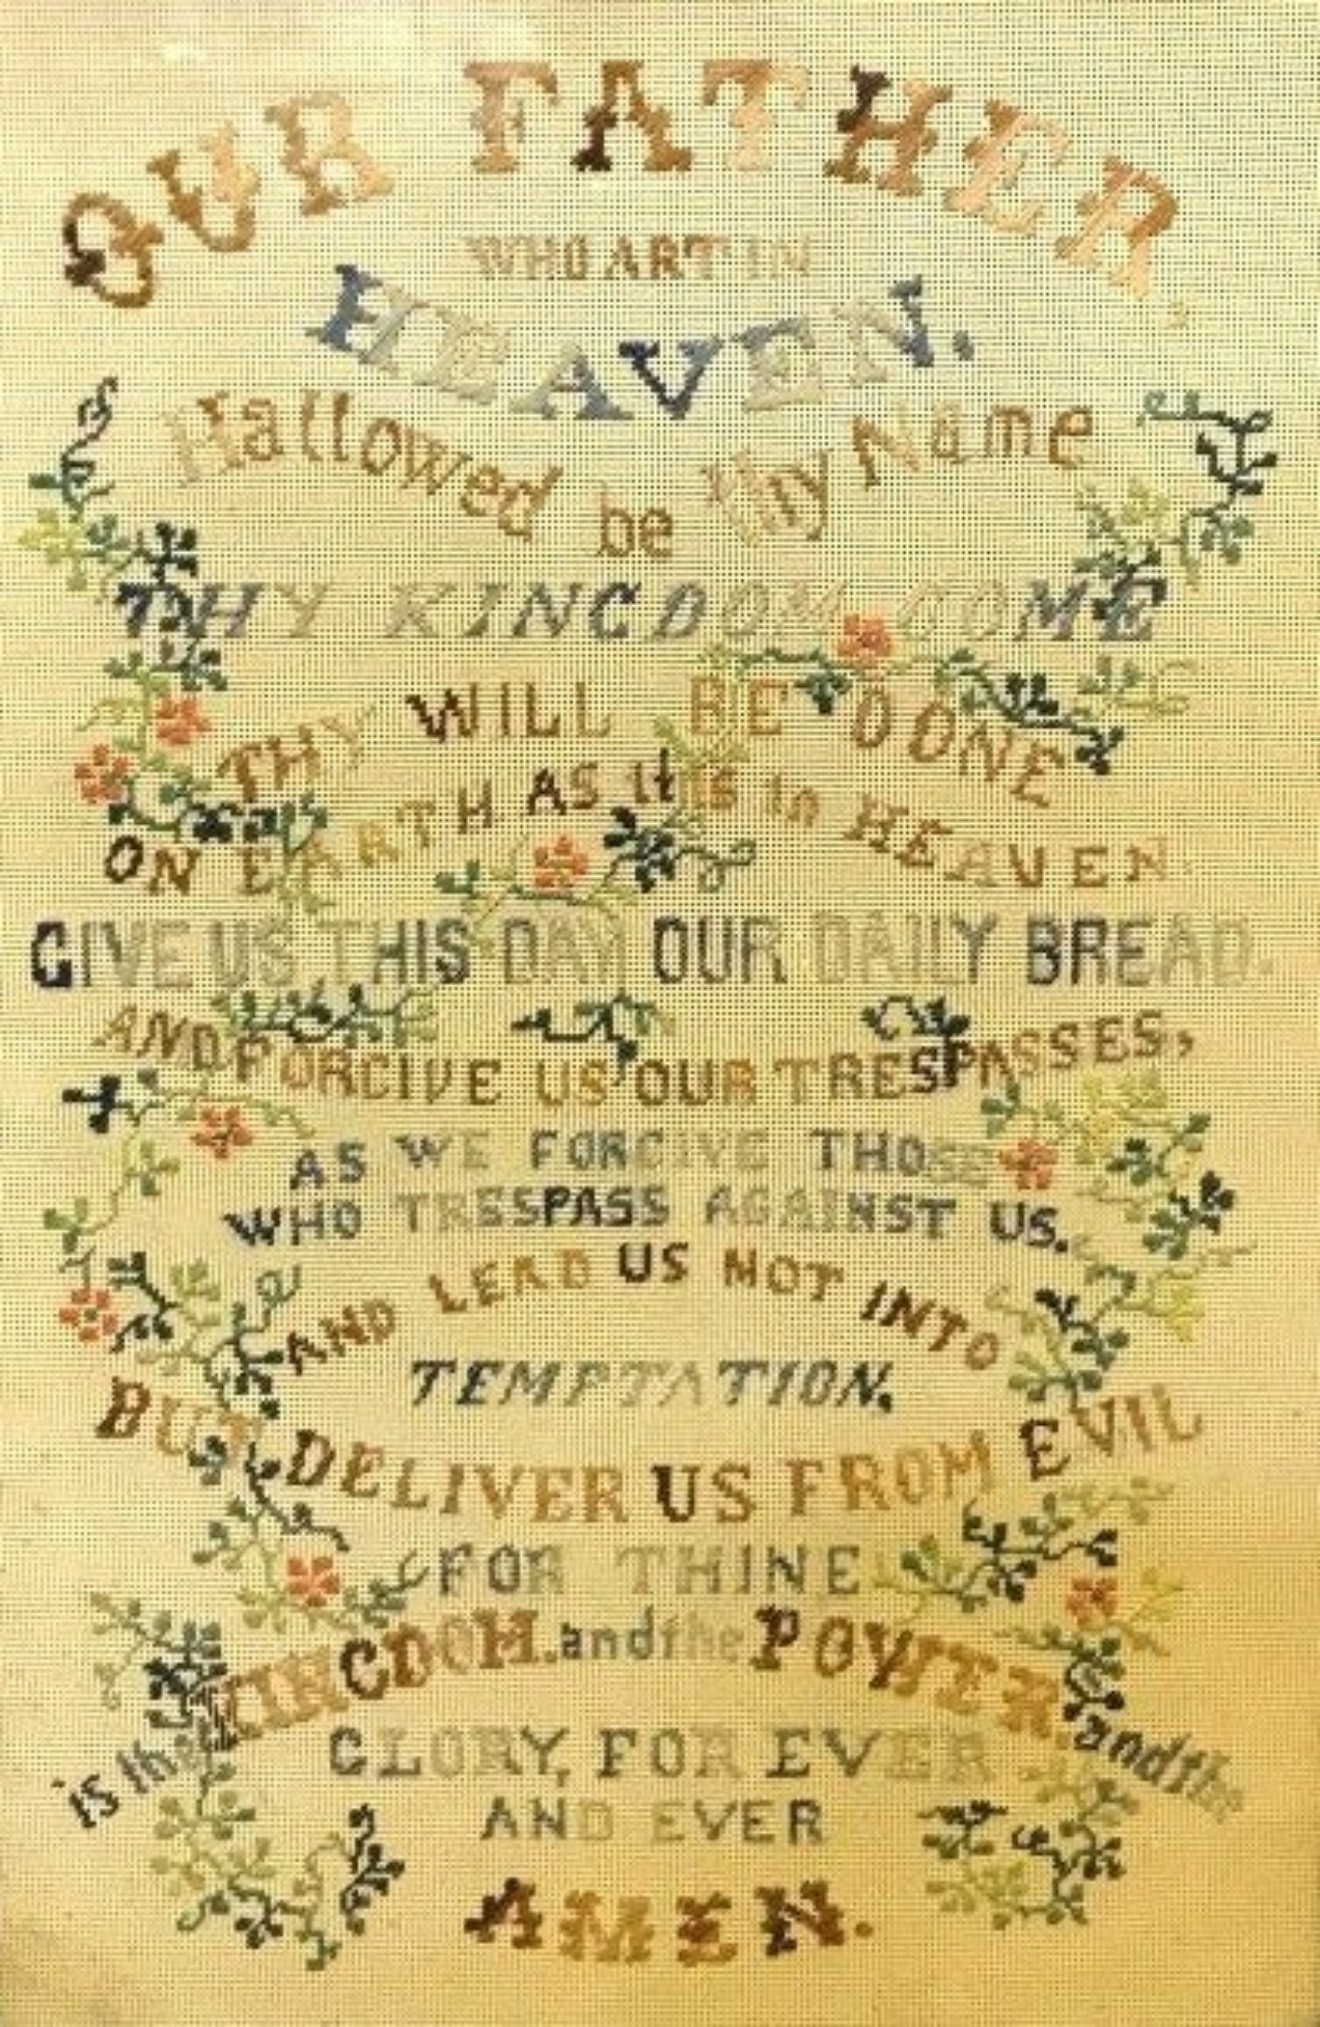 Antique "The Lord's Prayer" Needlepoint Tapestry Sampler